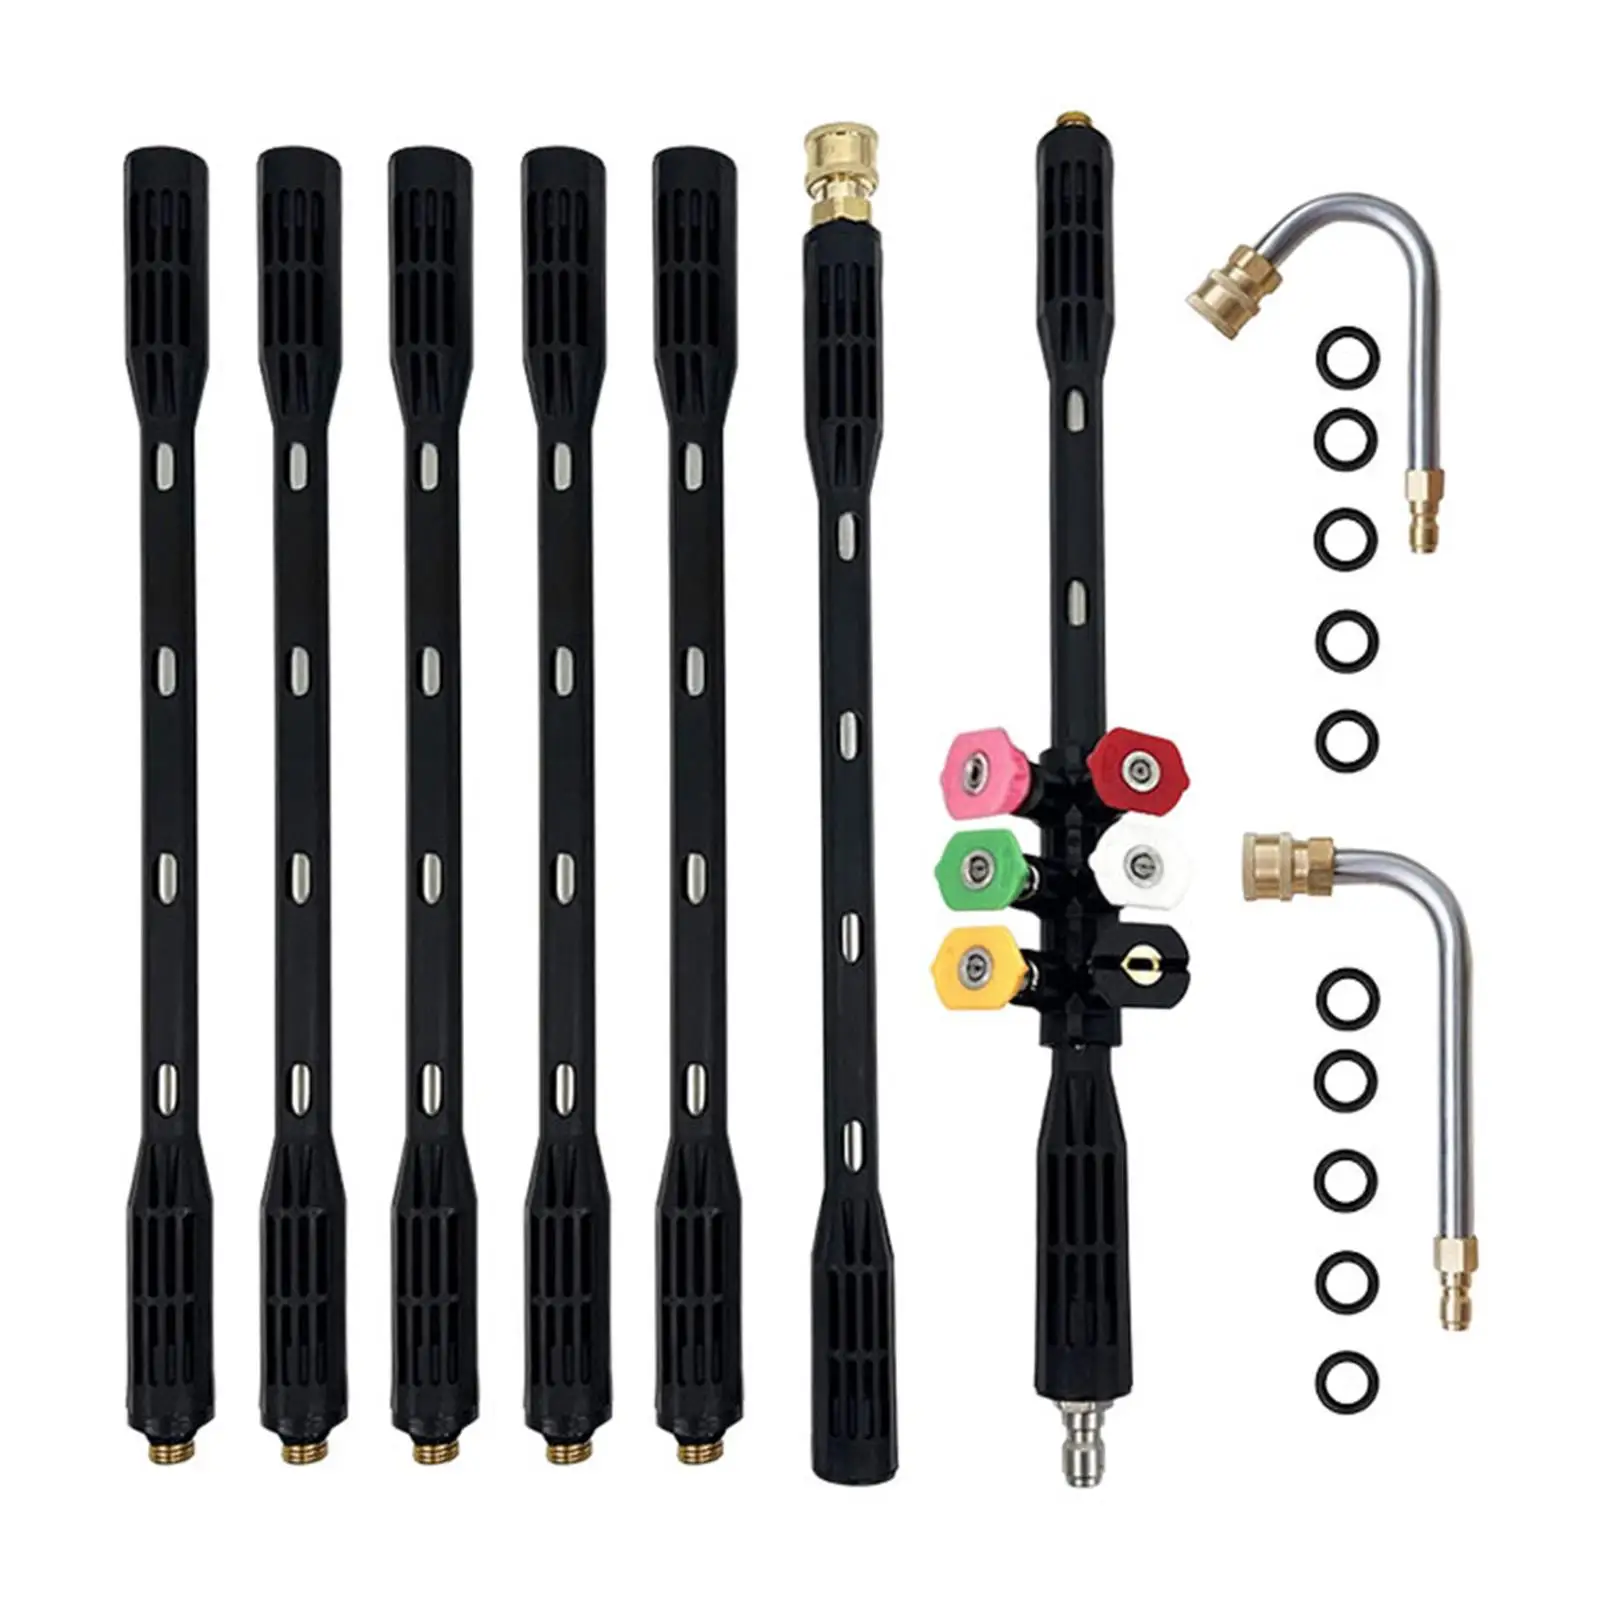 9 Pieces Pressure Washer Extension Rod for Pressure Washer Water Broom Car